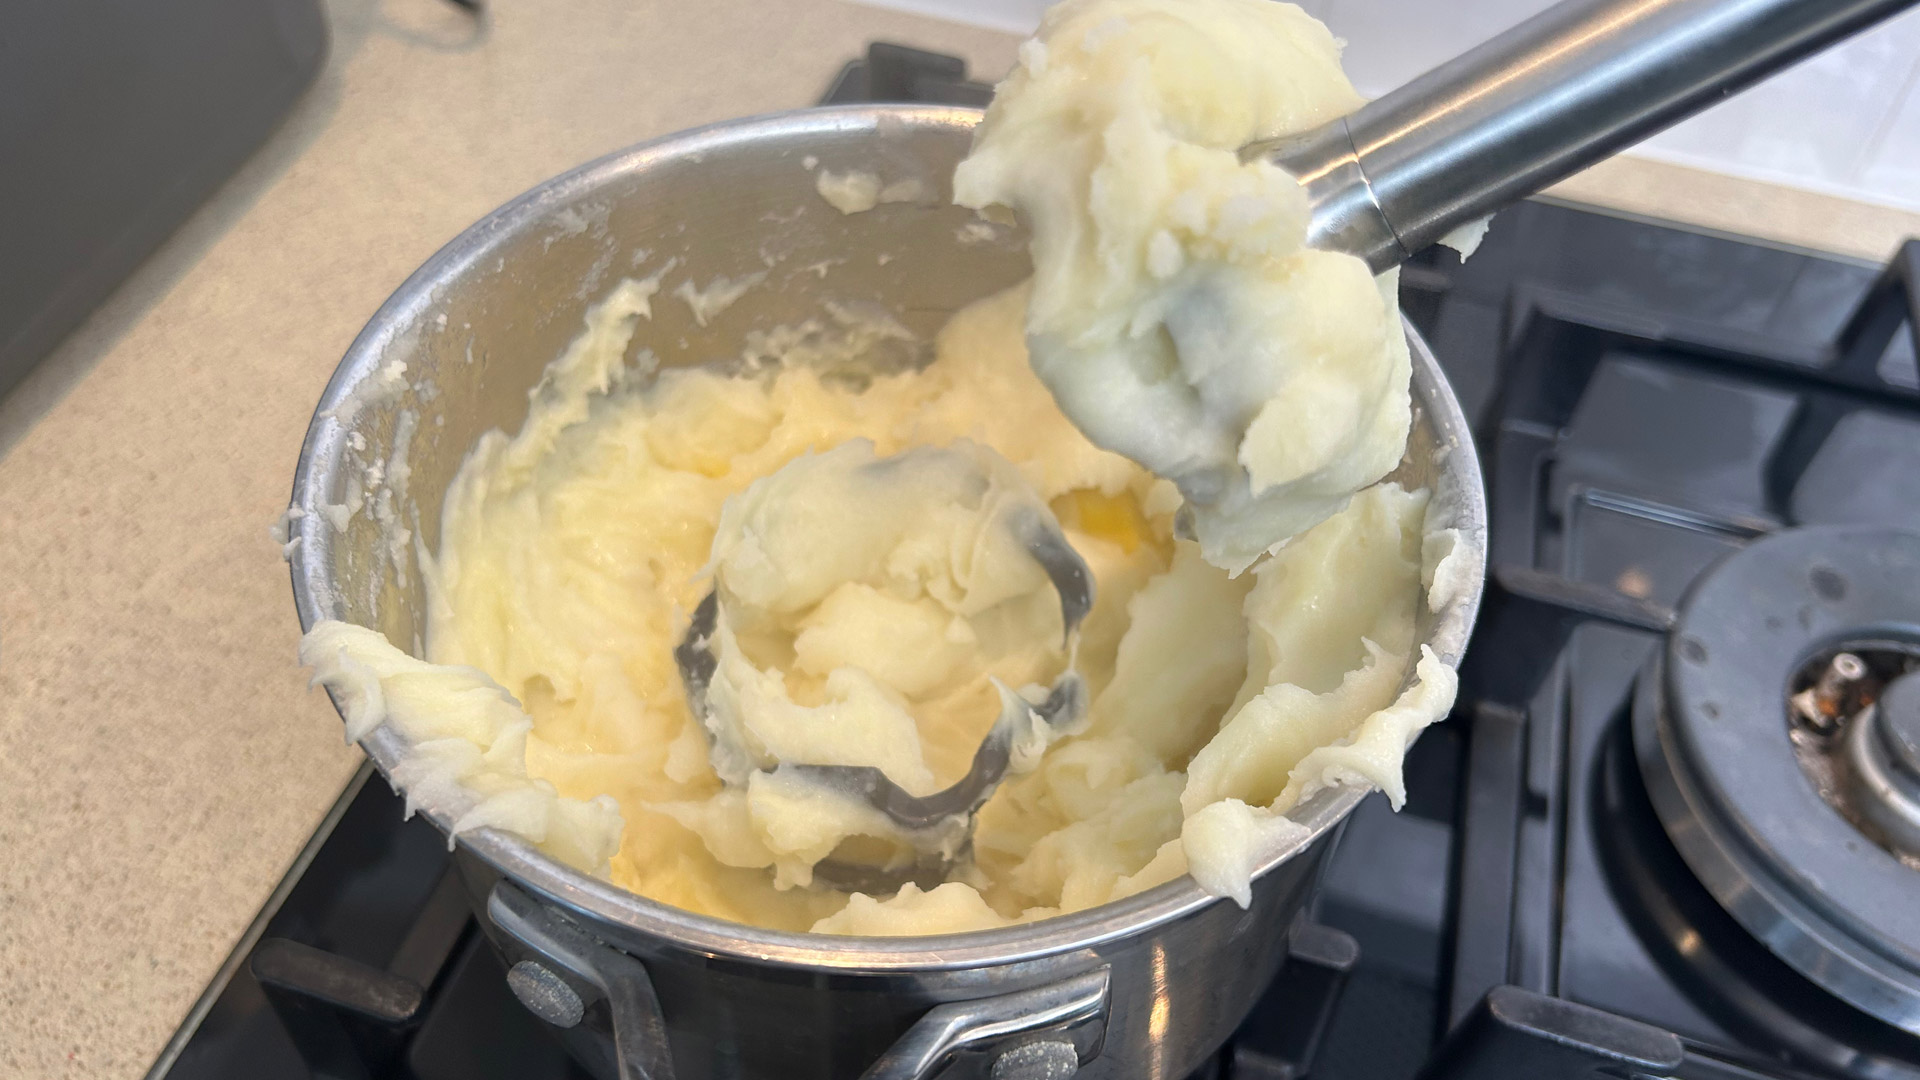 The KitchenAid Go Cordless Hand Blender's pan protector comes off and gets chopped while making potato puree